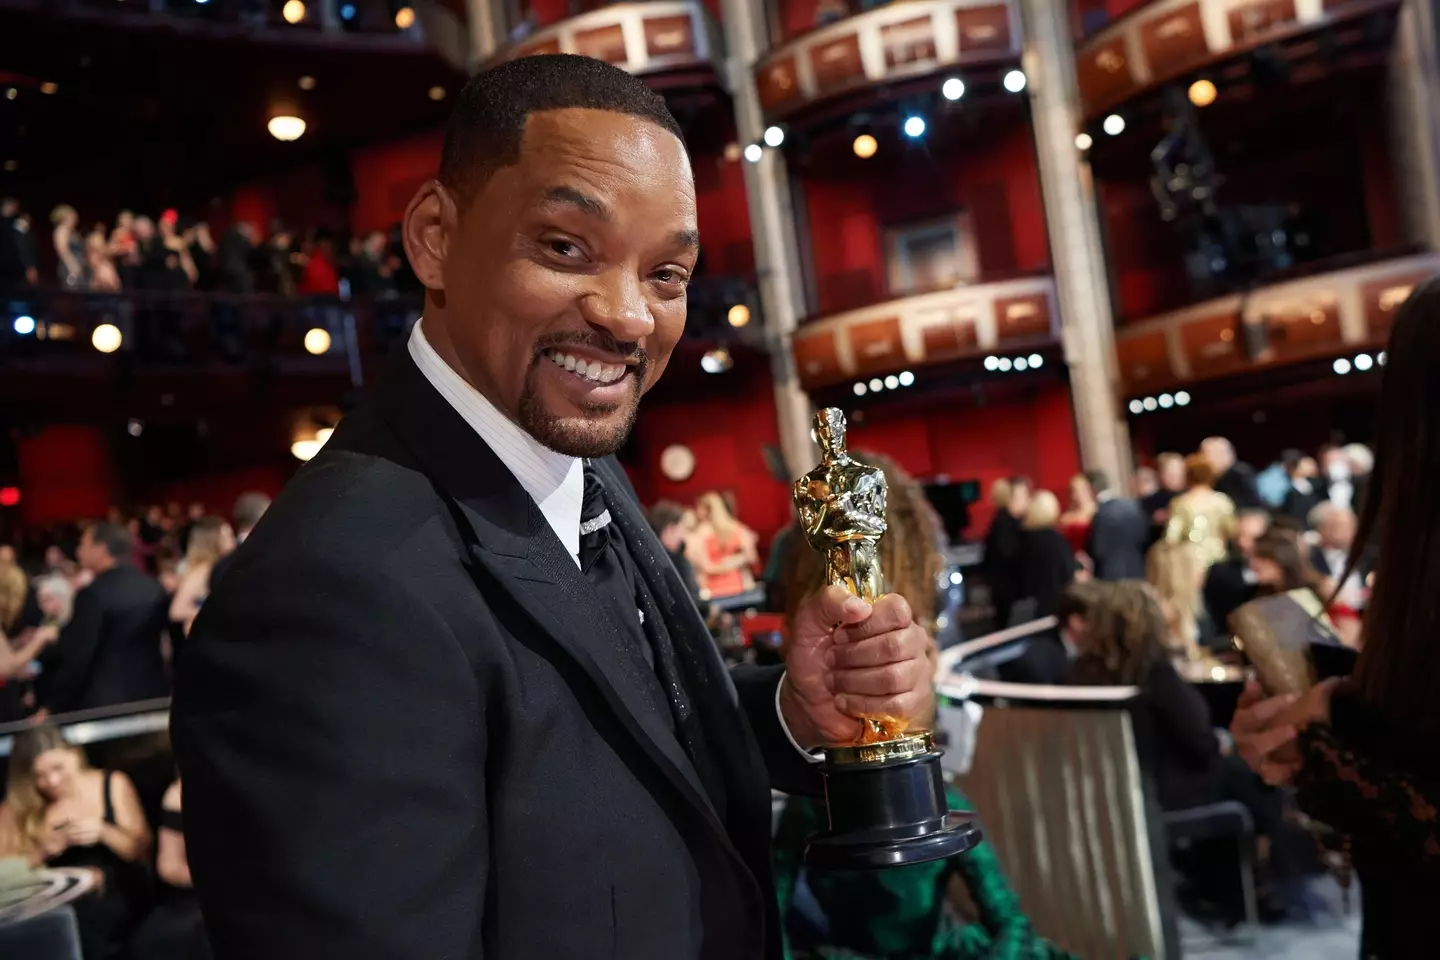 Will Smith has resigned from the Academy.